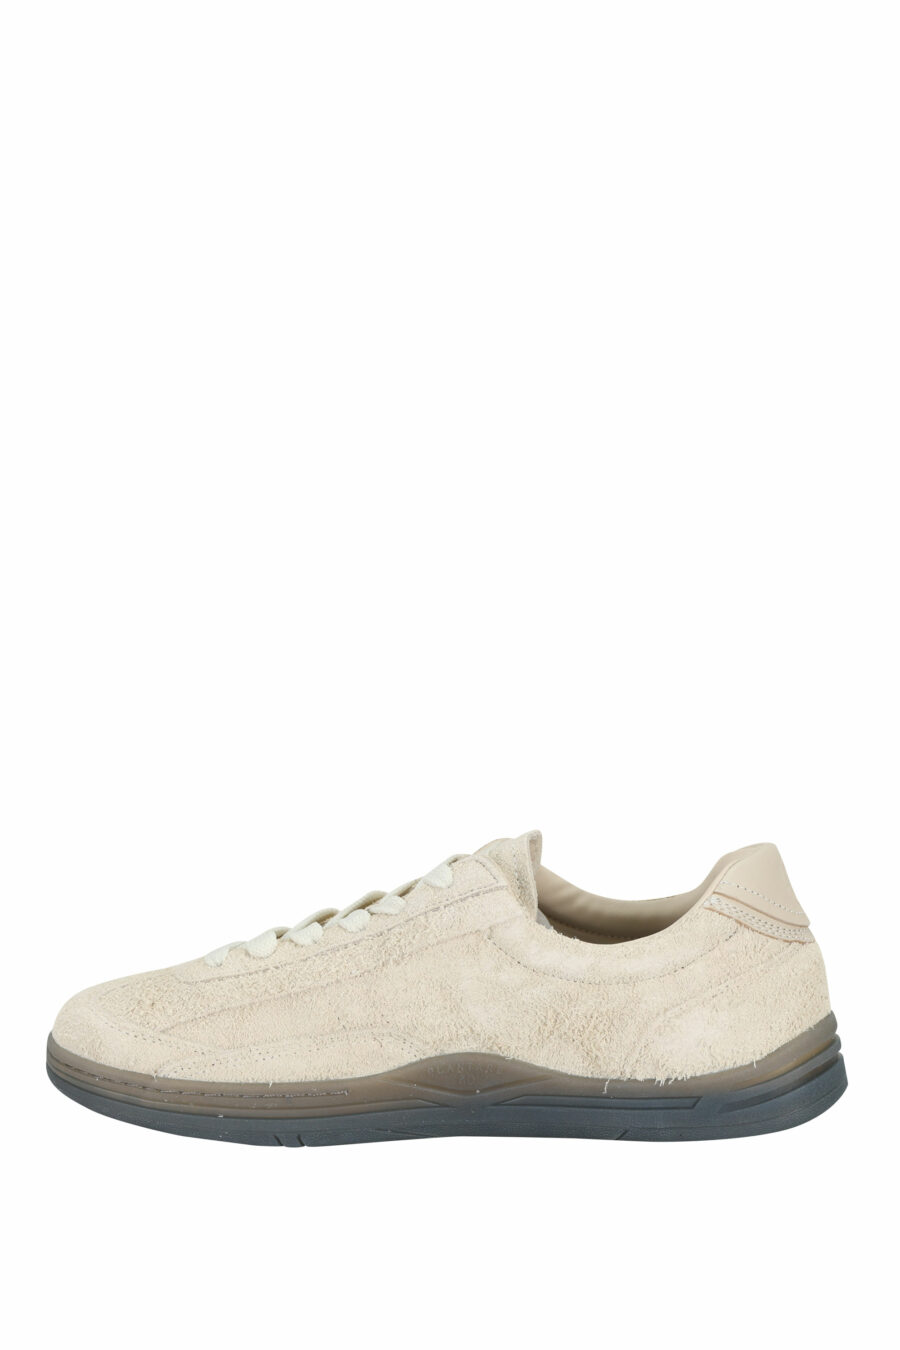 Beige trainers with minilogo and grey sole - 8052572915505 2